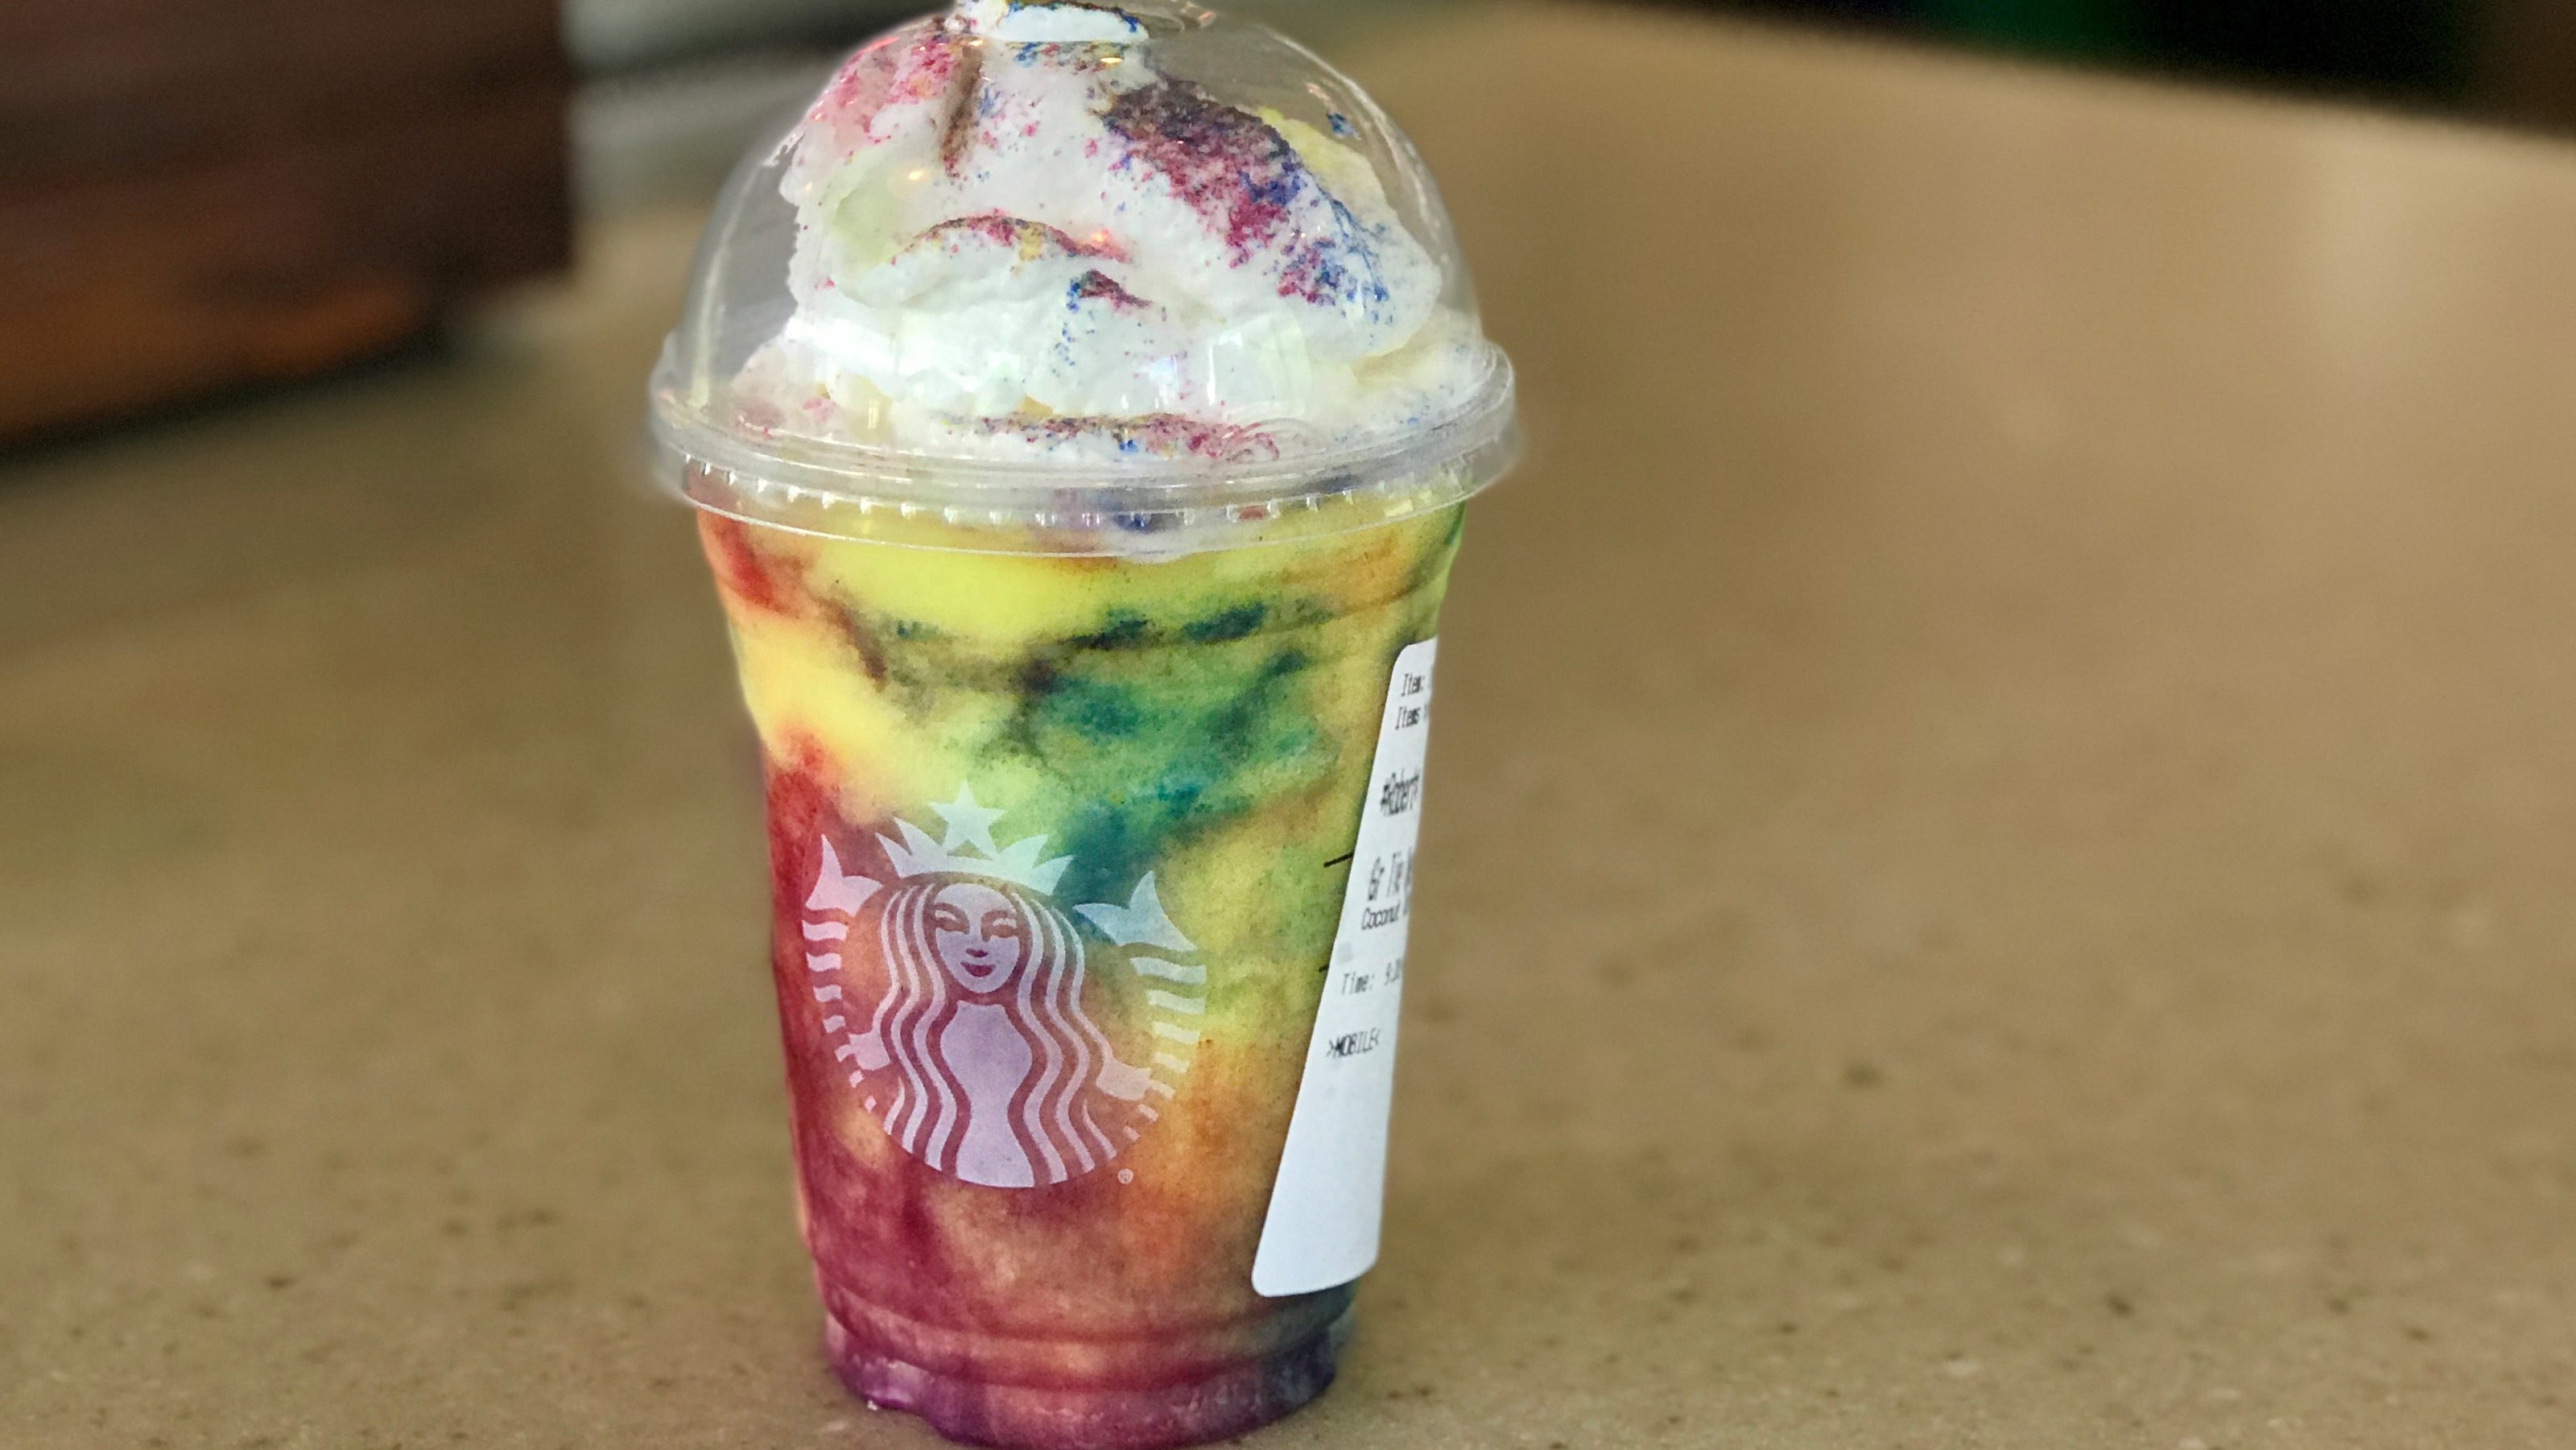 Starbucks Tie Dye Frappuccino review: What the flavor tastes like